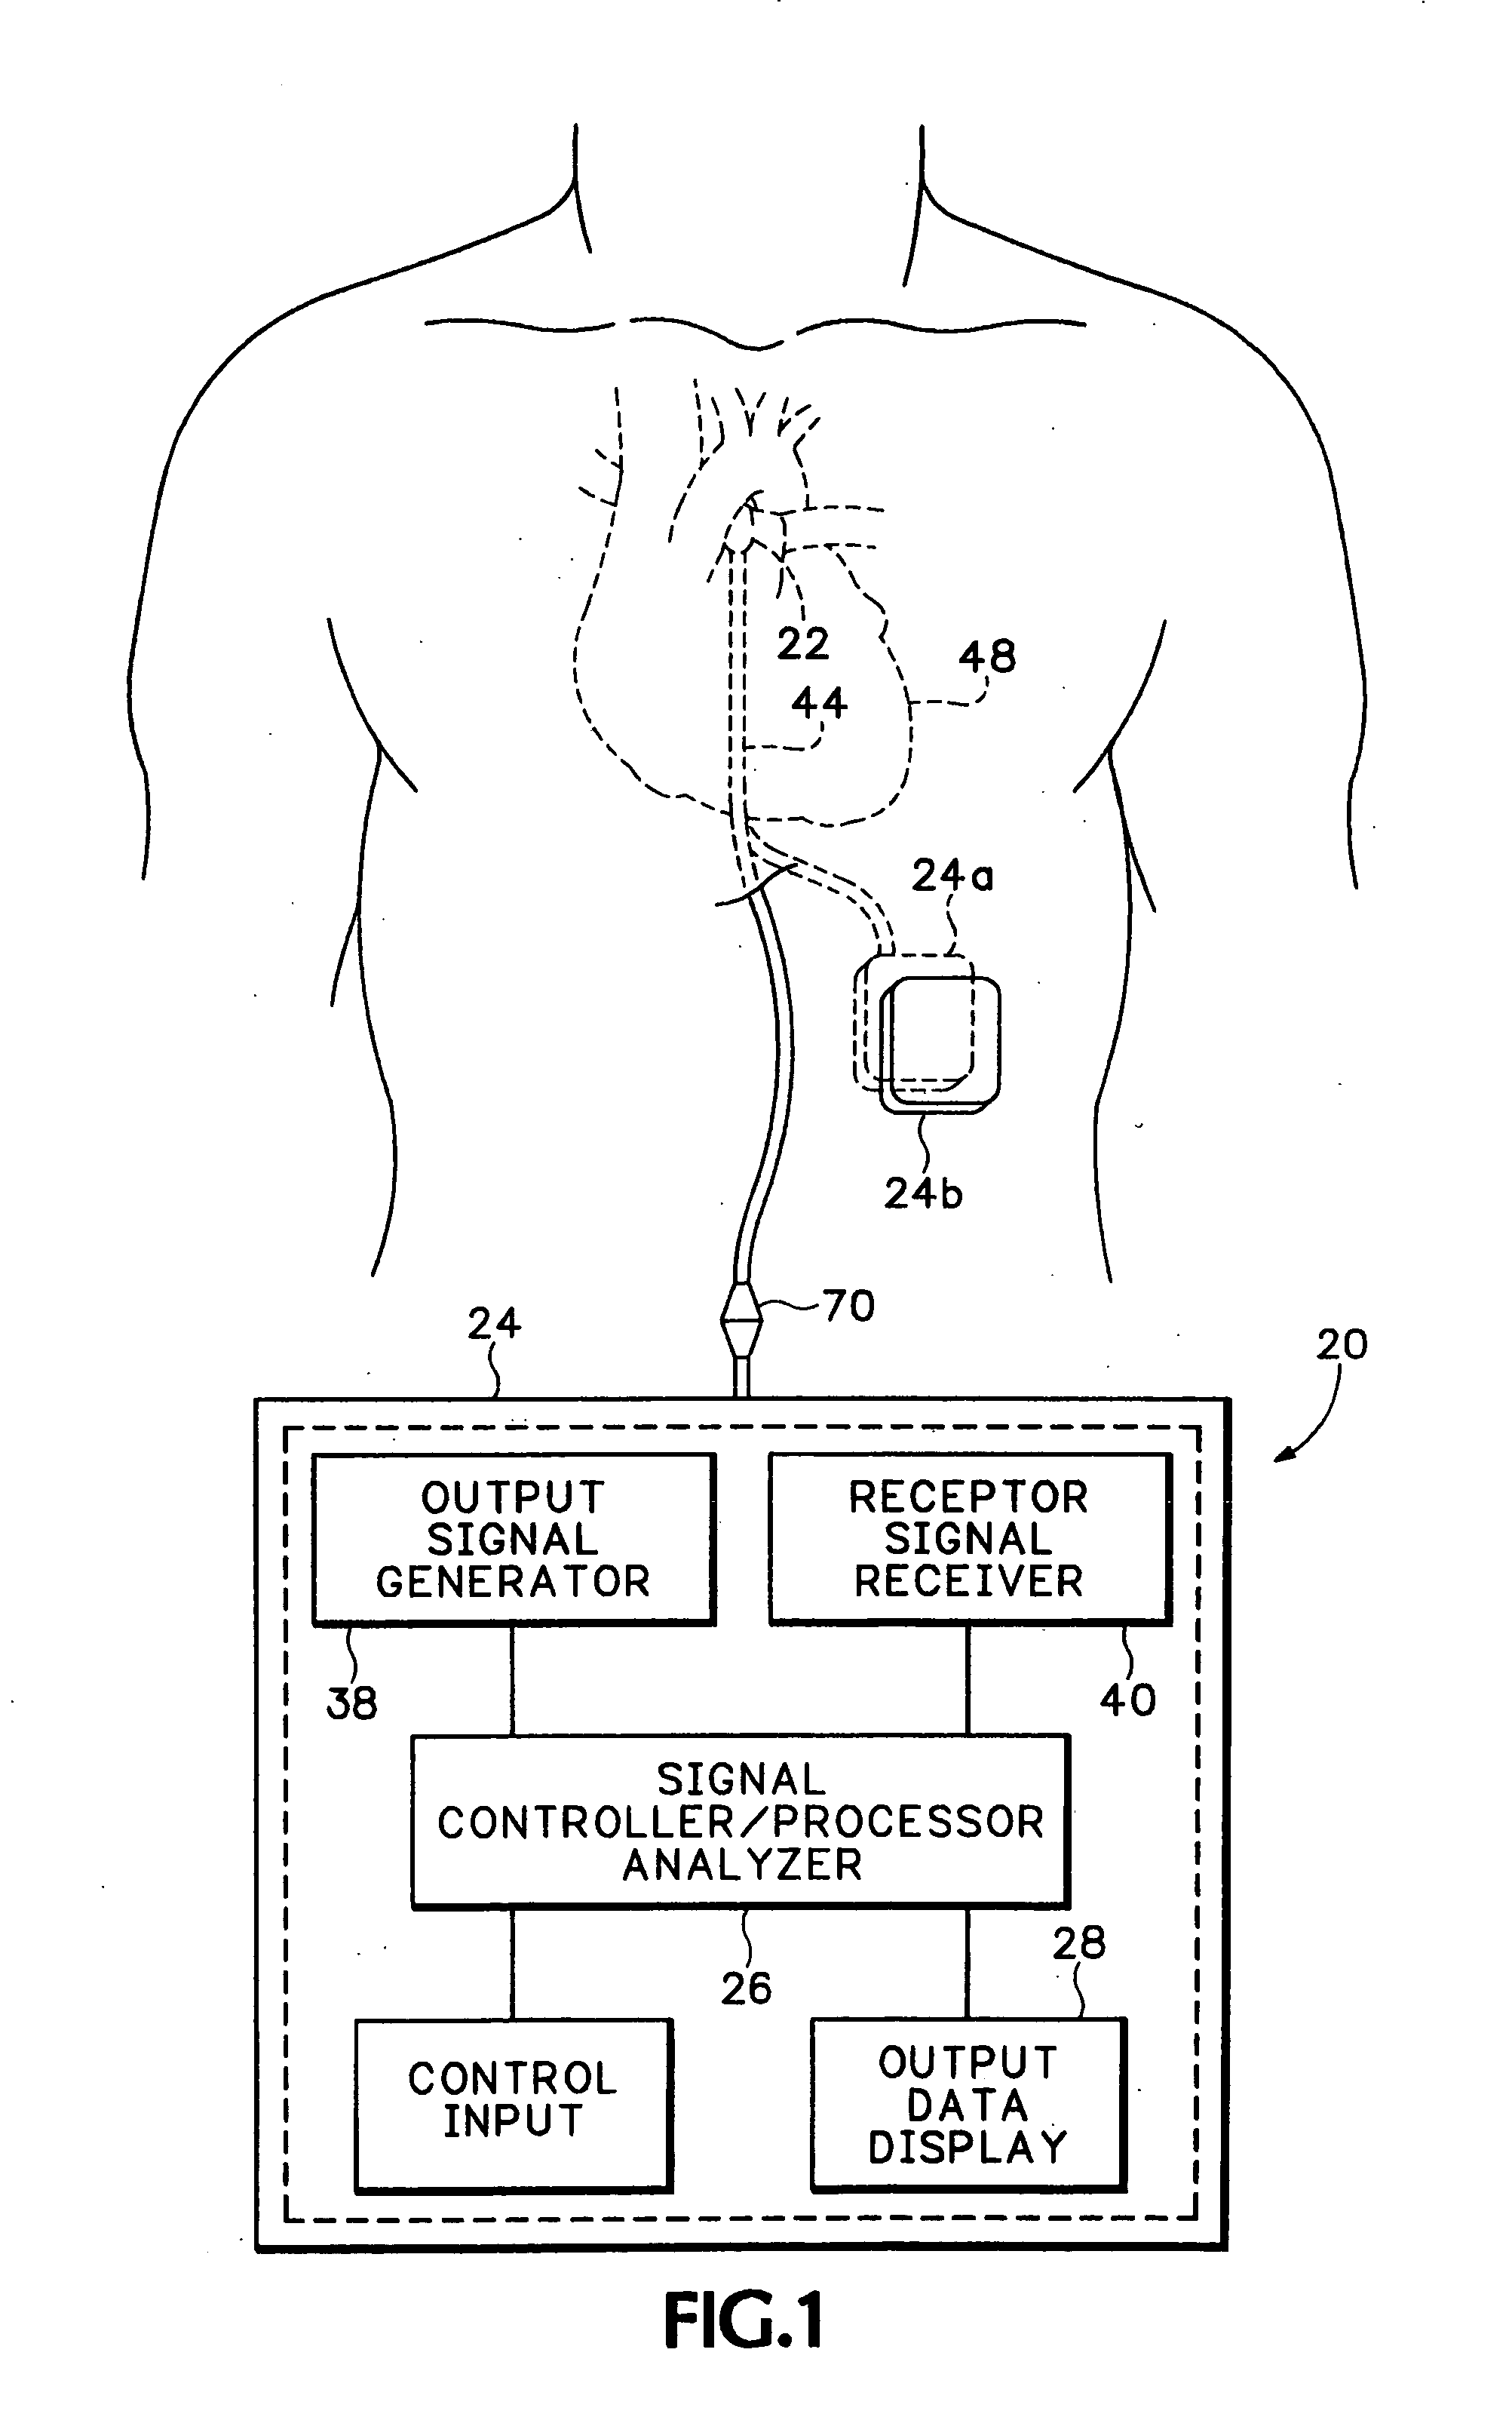 Method and apparatus for monitoring blood condition and cardiopulmonary function